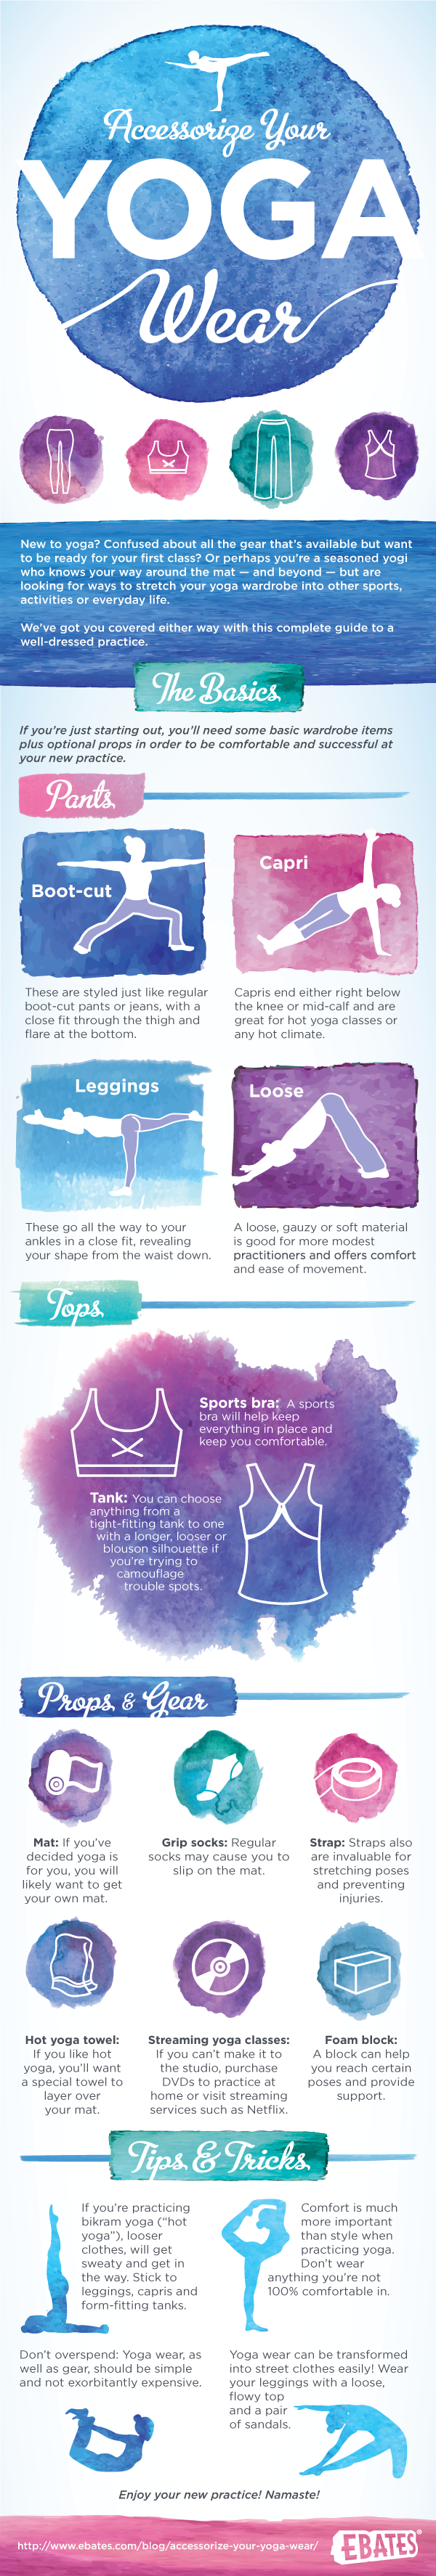 Accessorize Your Yoga Practice Infographic